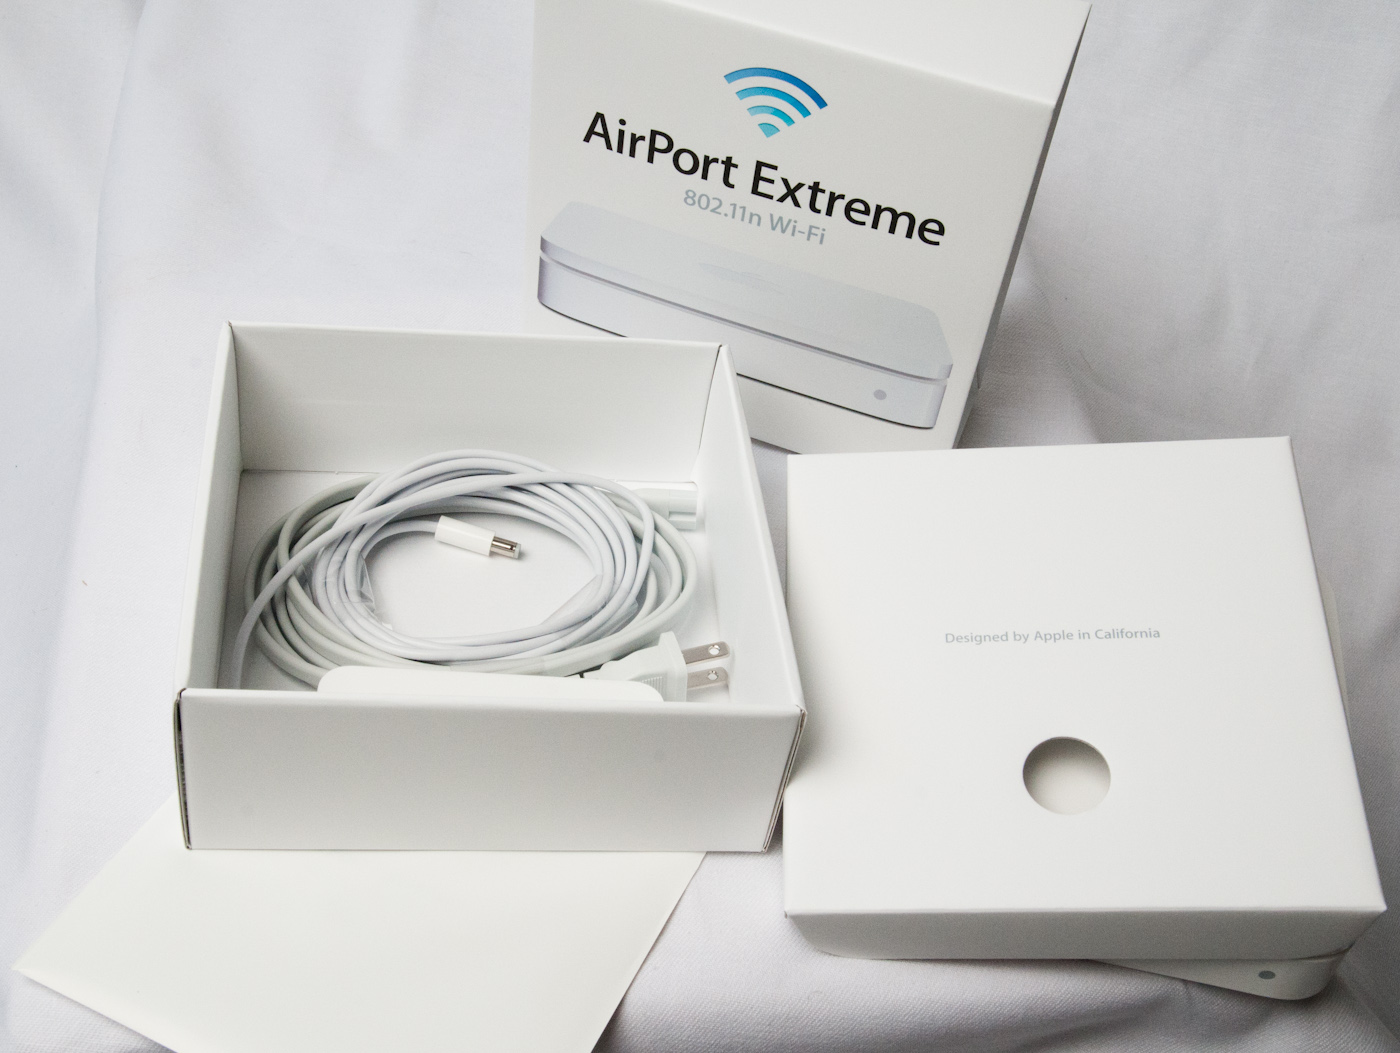 Extreme (5th Gen) and Time Gen) Review - Faster WiFi